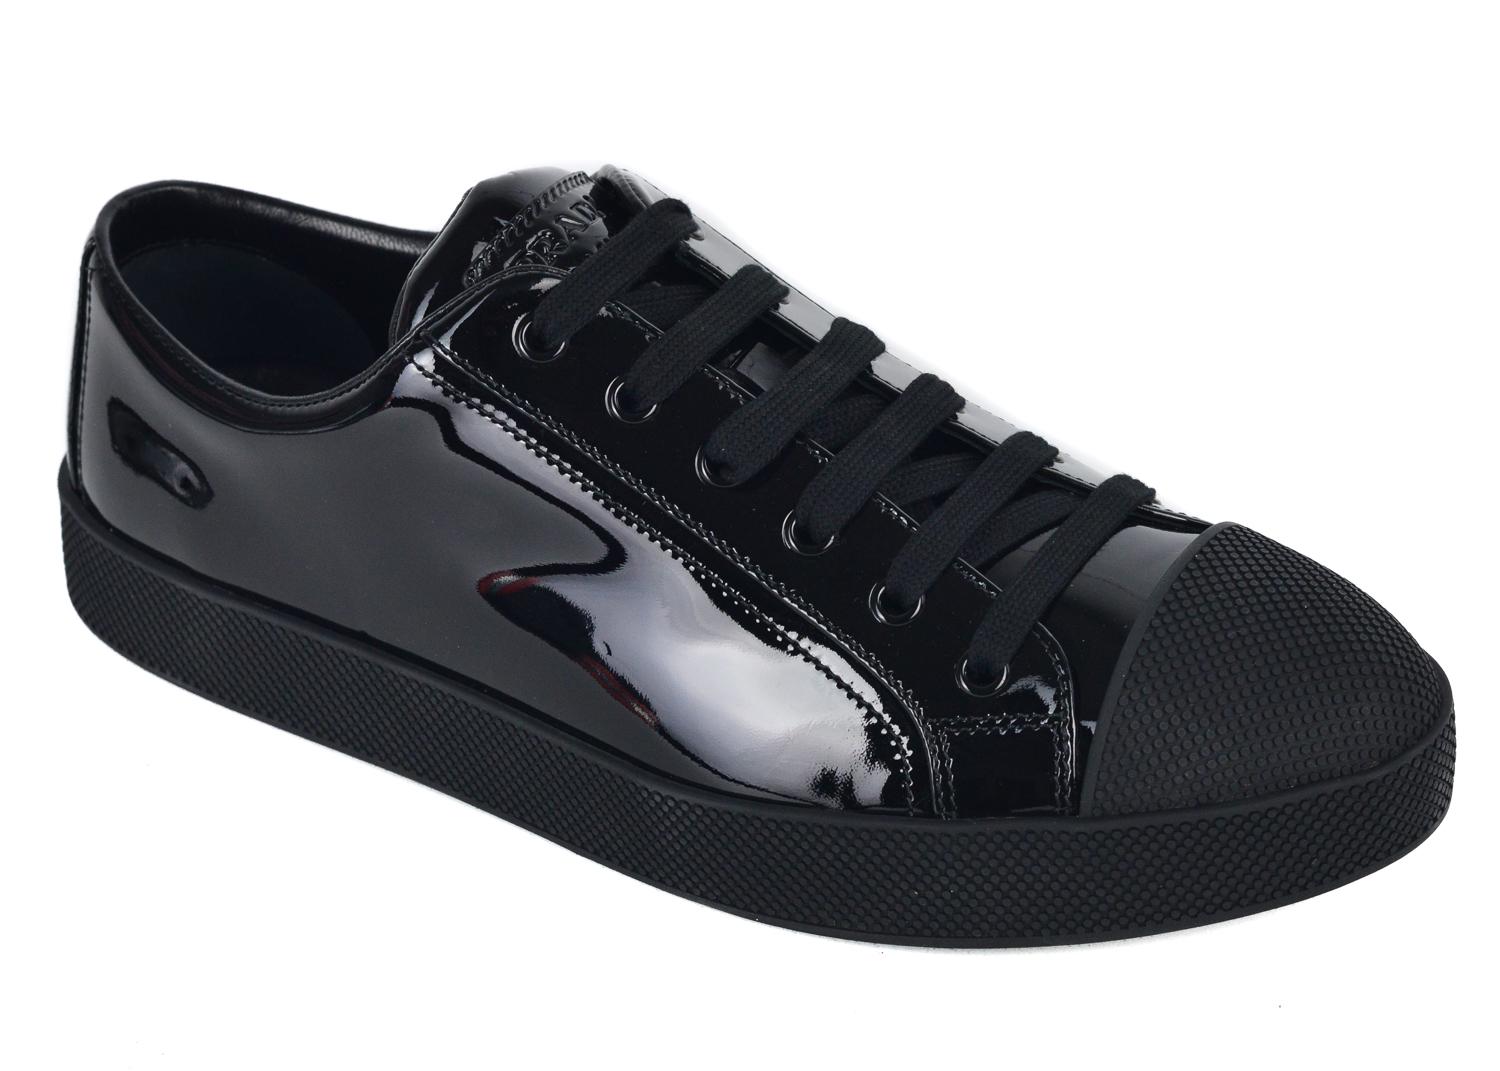 Prada black shiny leather sneakers. These shoes are the perfect pair to wear to work or as an everyday shoe or wear it at night party with a maxi dress. 


Material patent leather,leather lining
Low-top sneakers
Logo detail, no appliqués
Closure